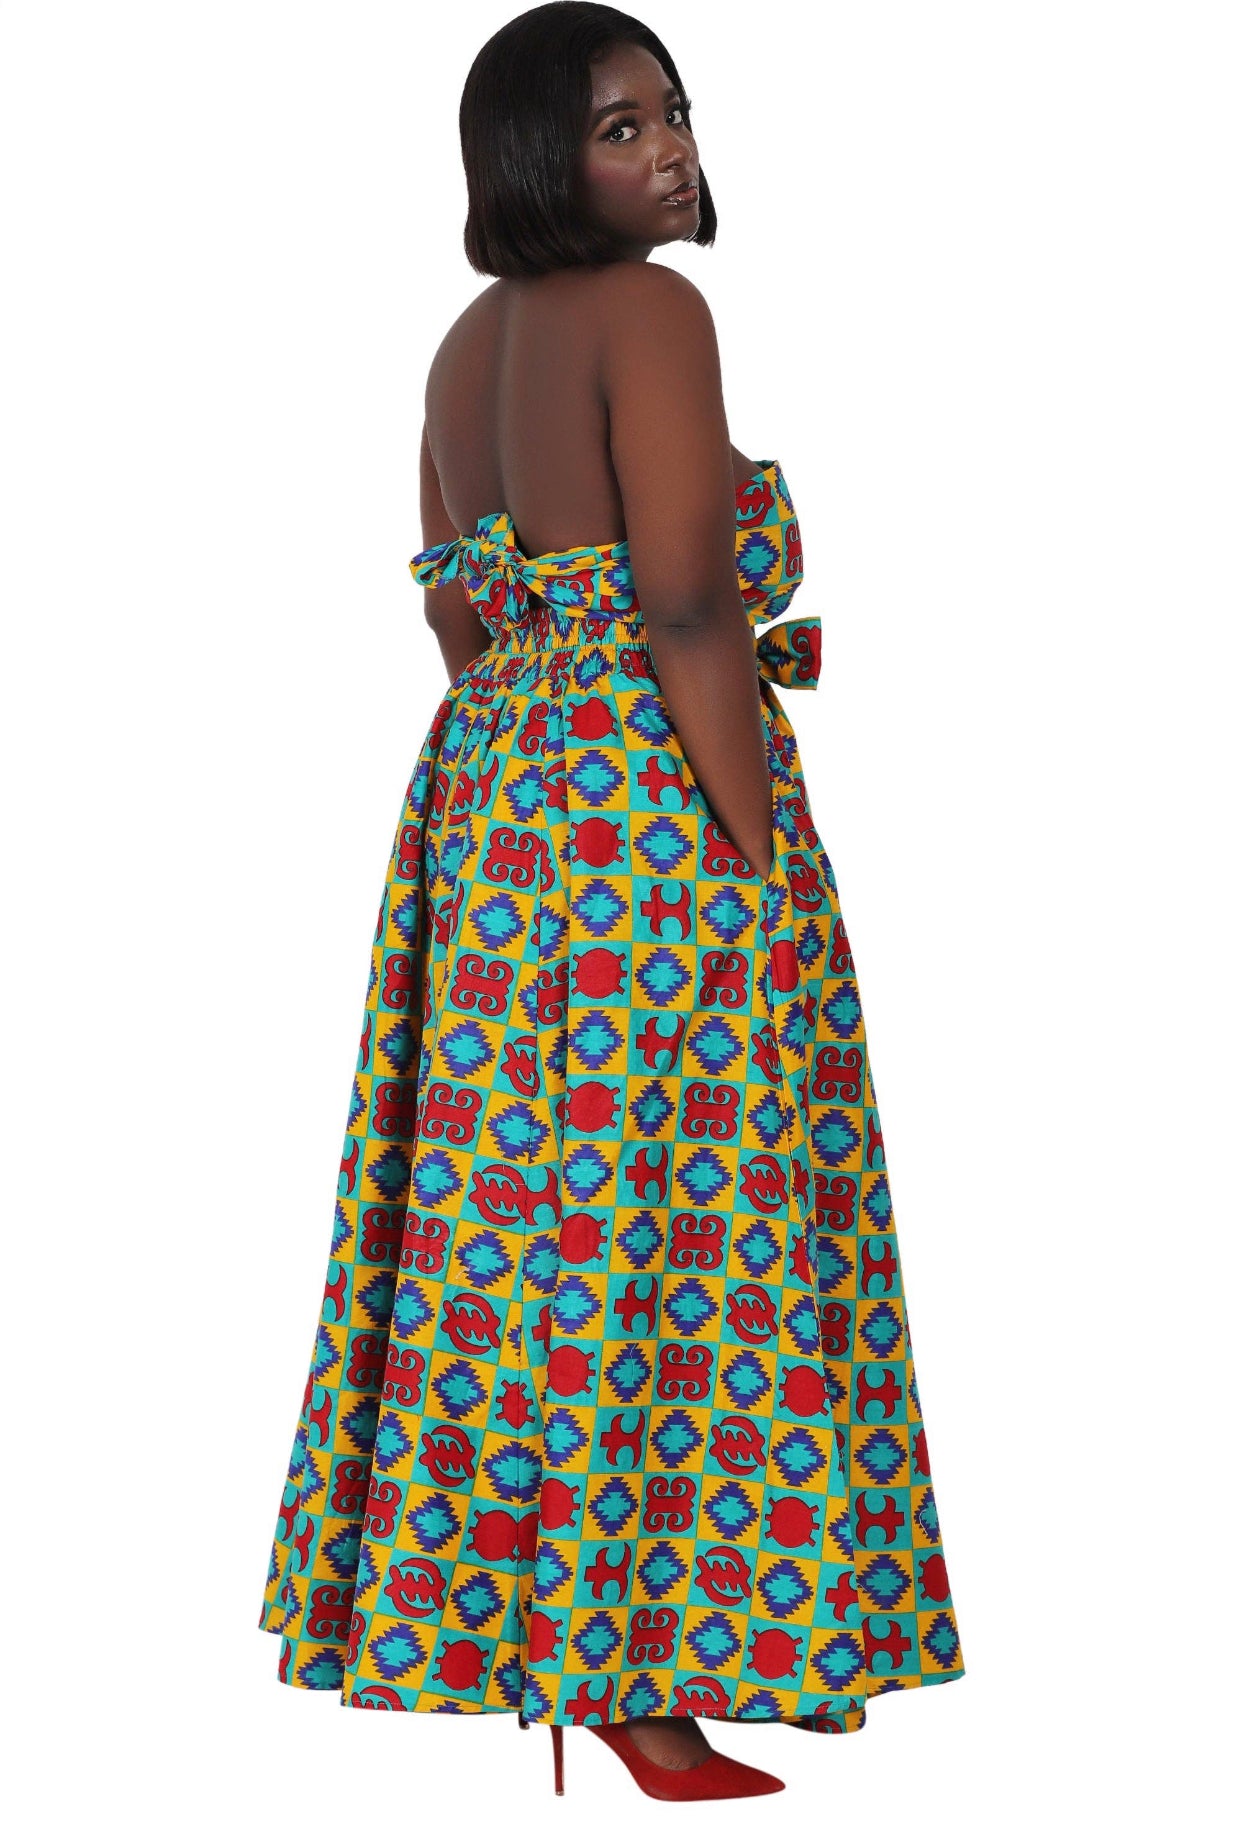 Hand Mad African Print Full Skirt with Coordinating Head Wrap and Facemask (Red, Blue, Yellow Patterns)